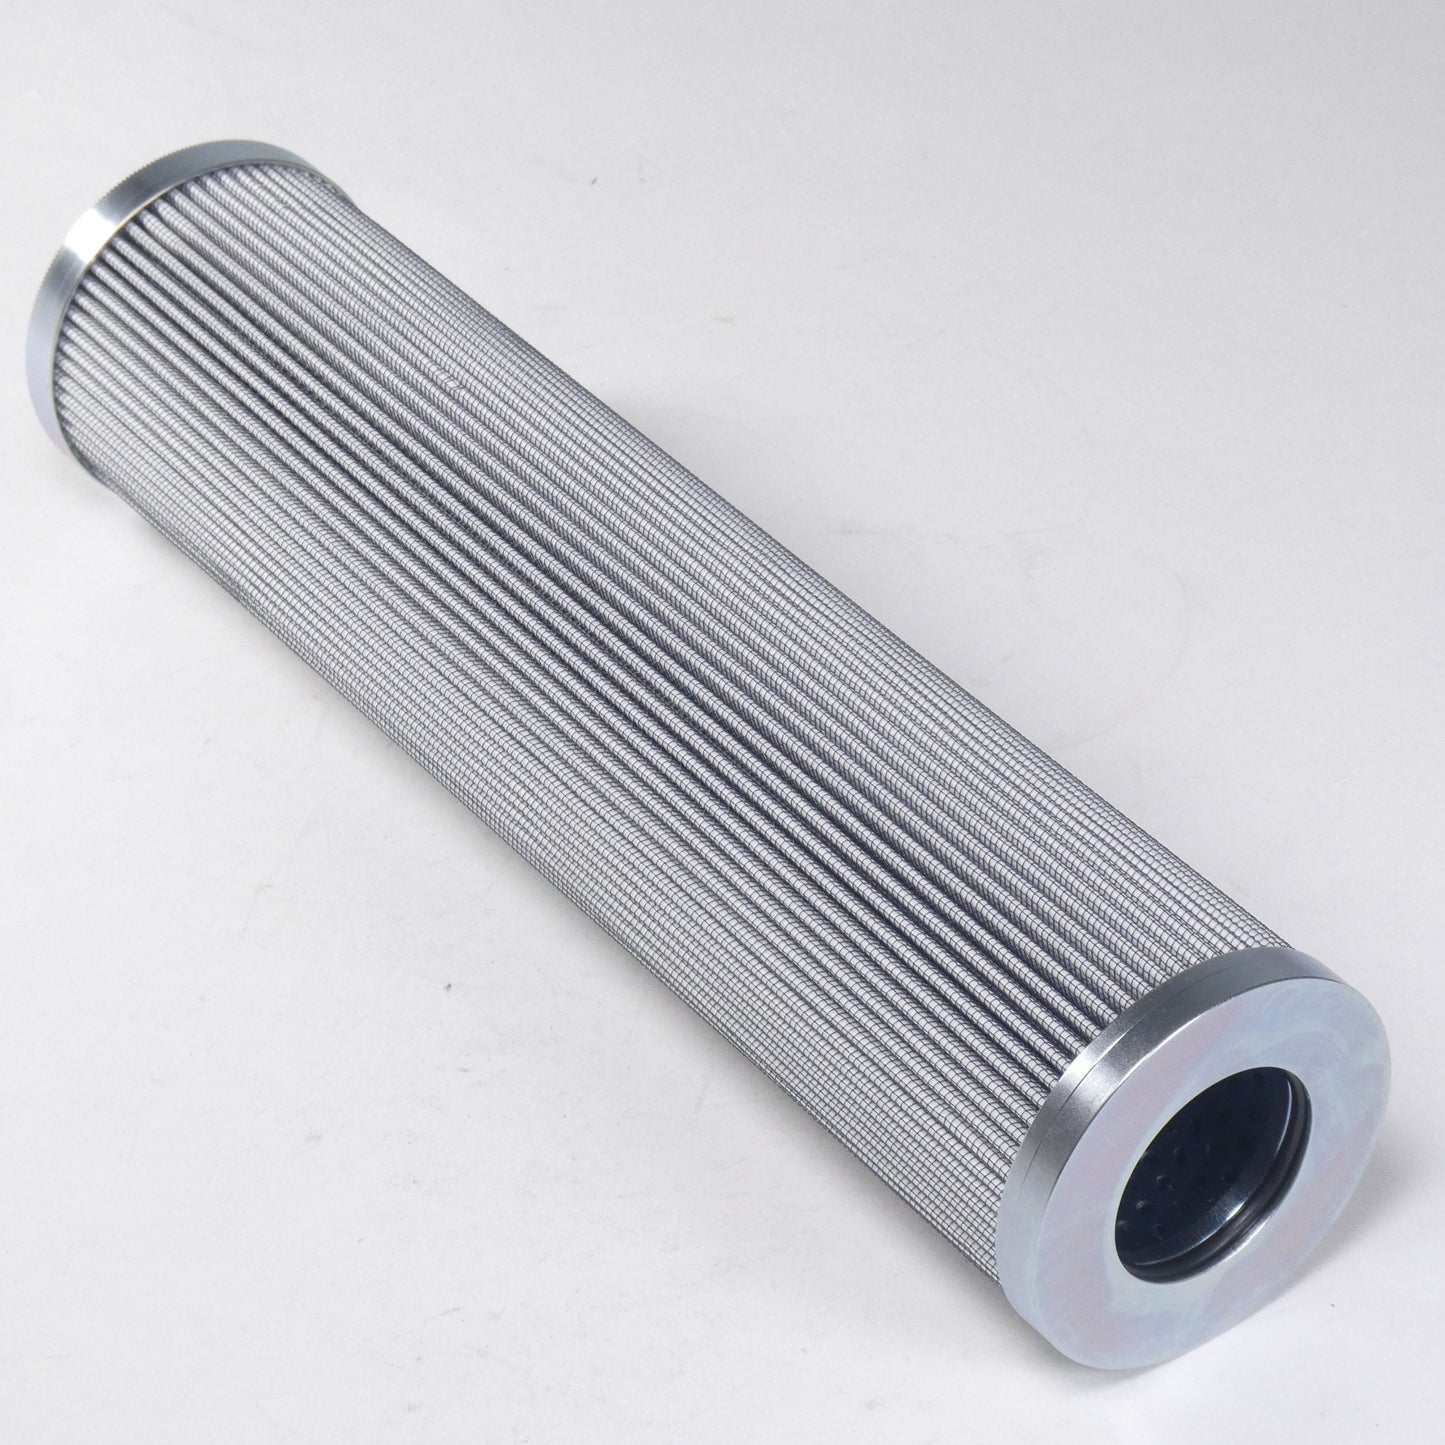 Hydrafil Replacement Filter Element for Pall HC9601FCN13ZA